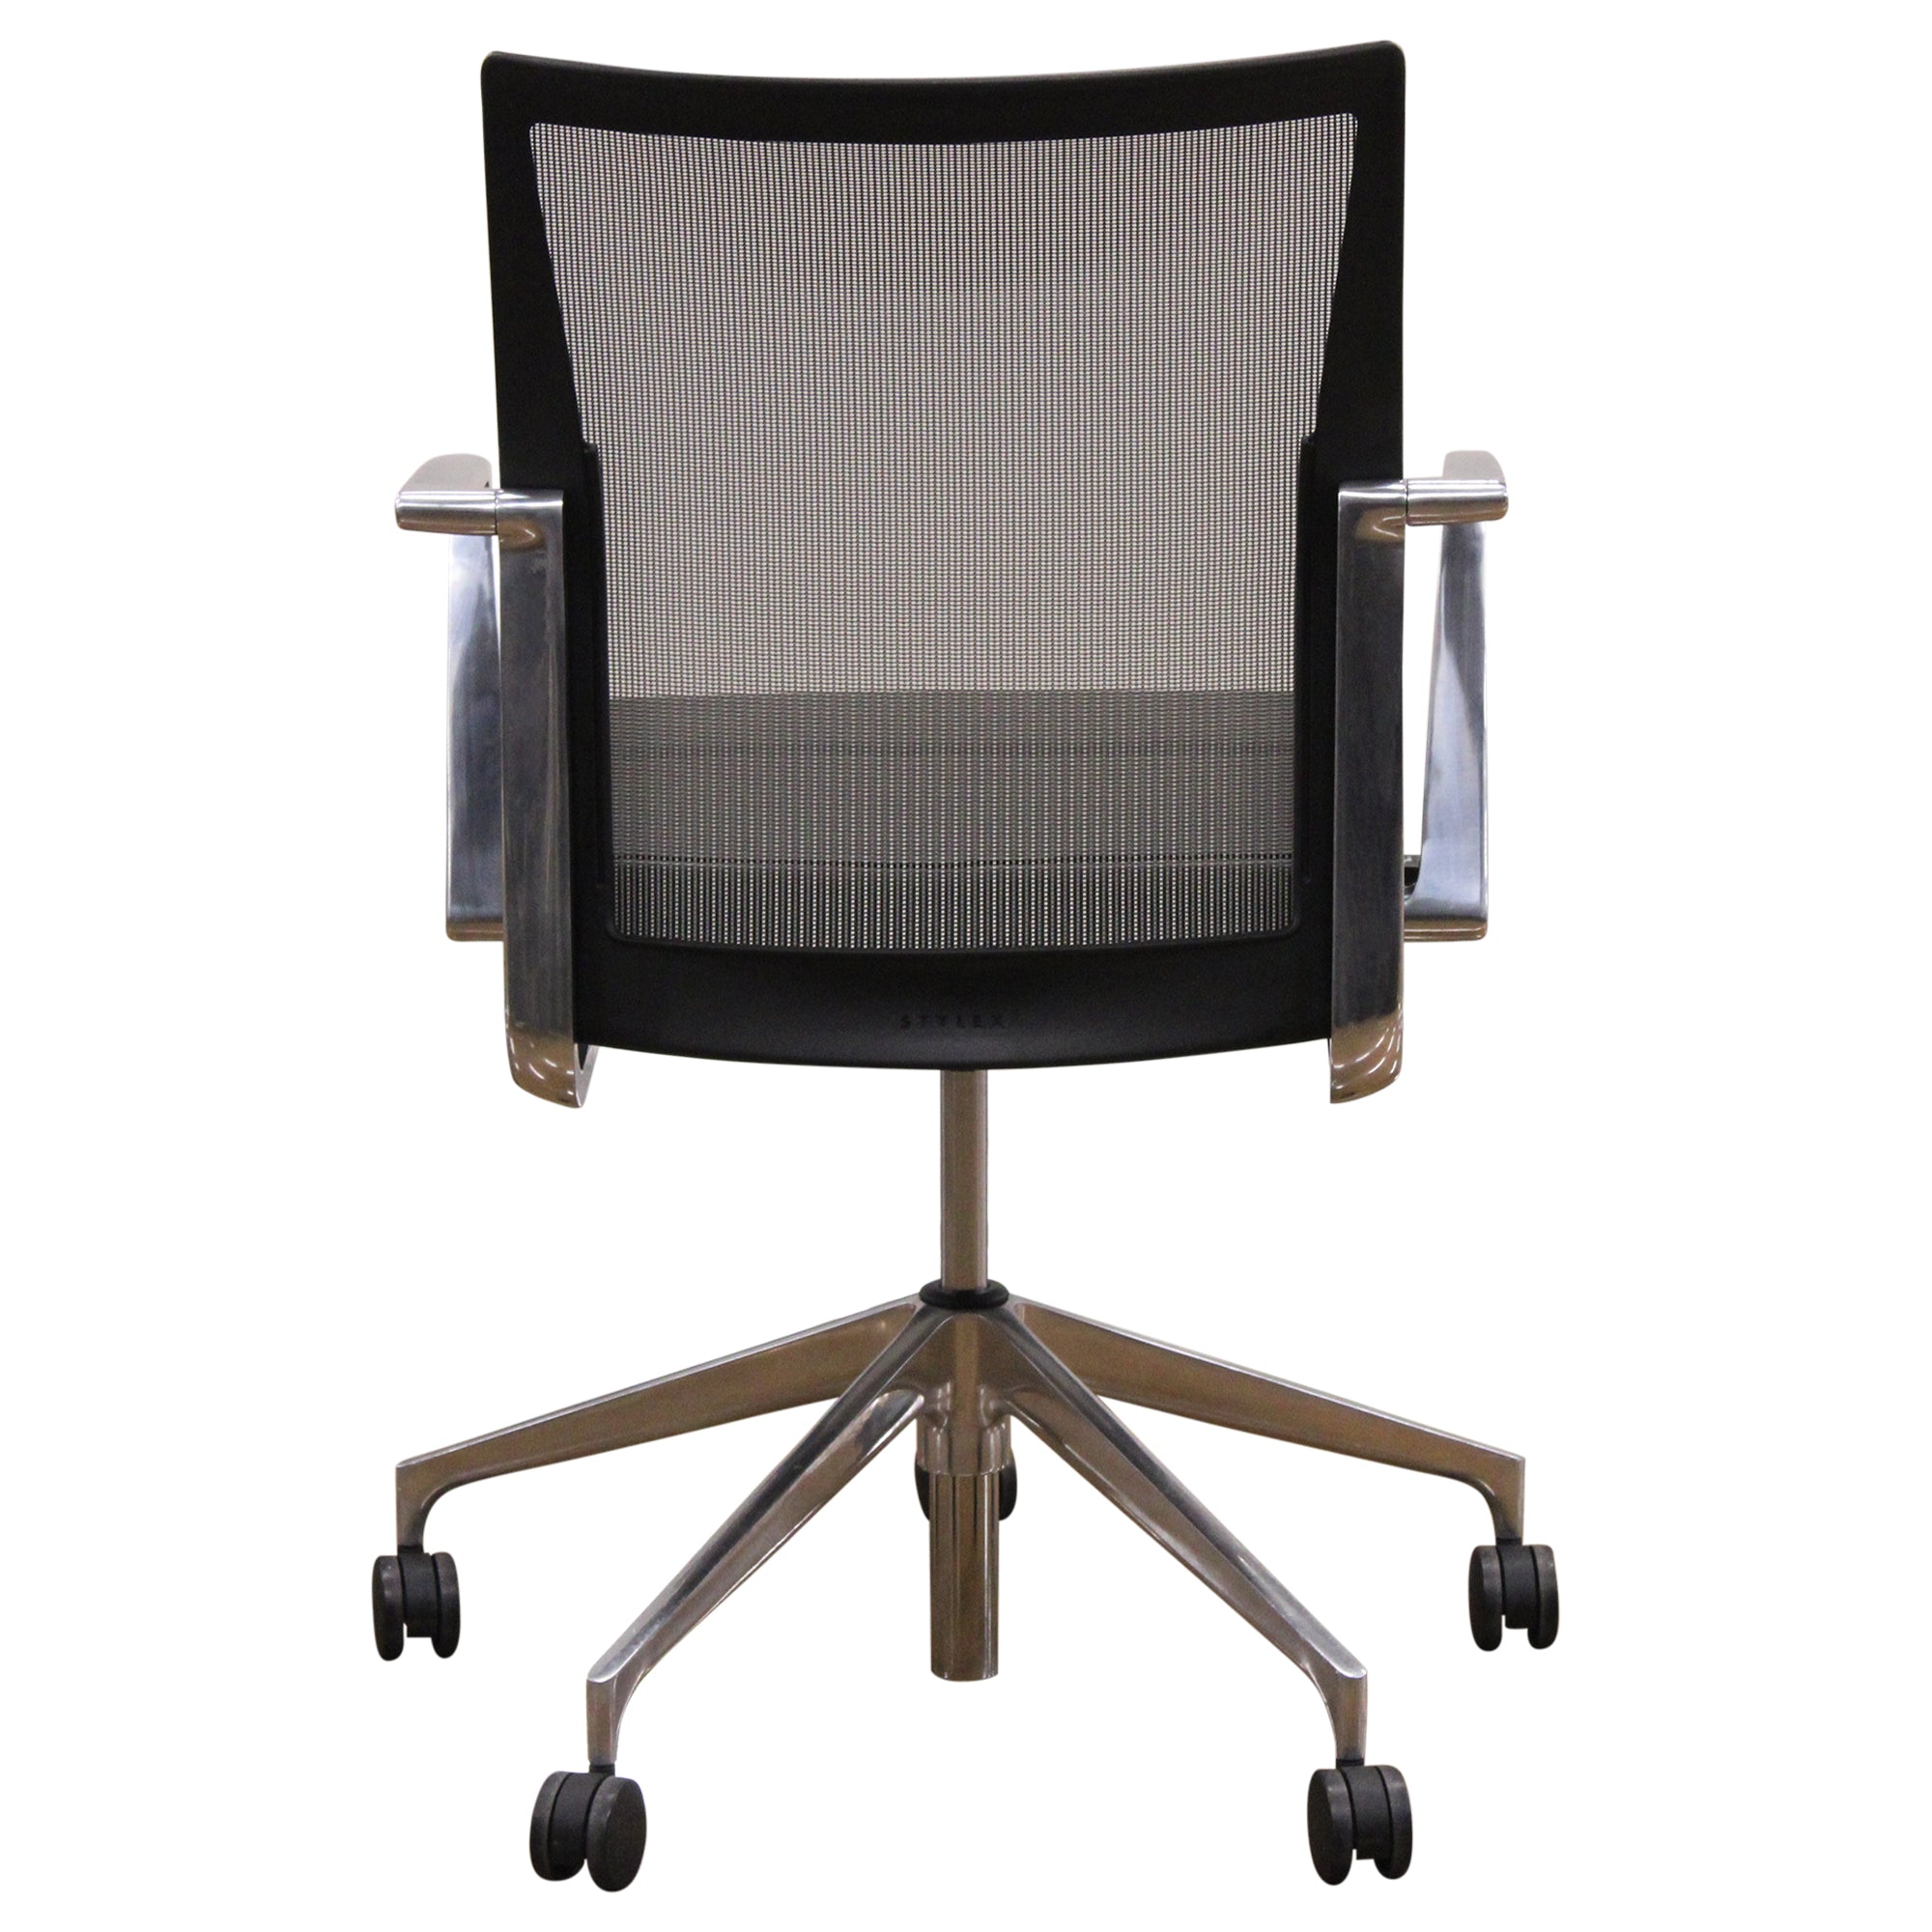 Stylex Sava Conference Chair, Leather, Black - Preowned